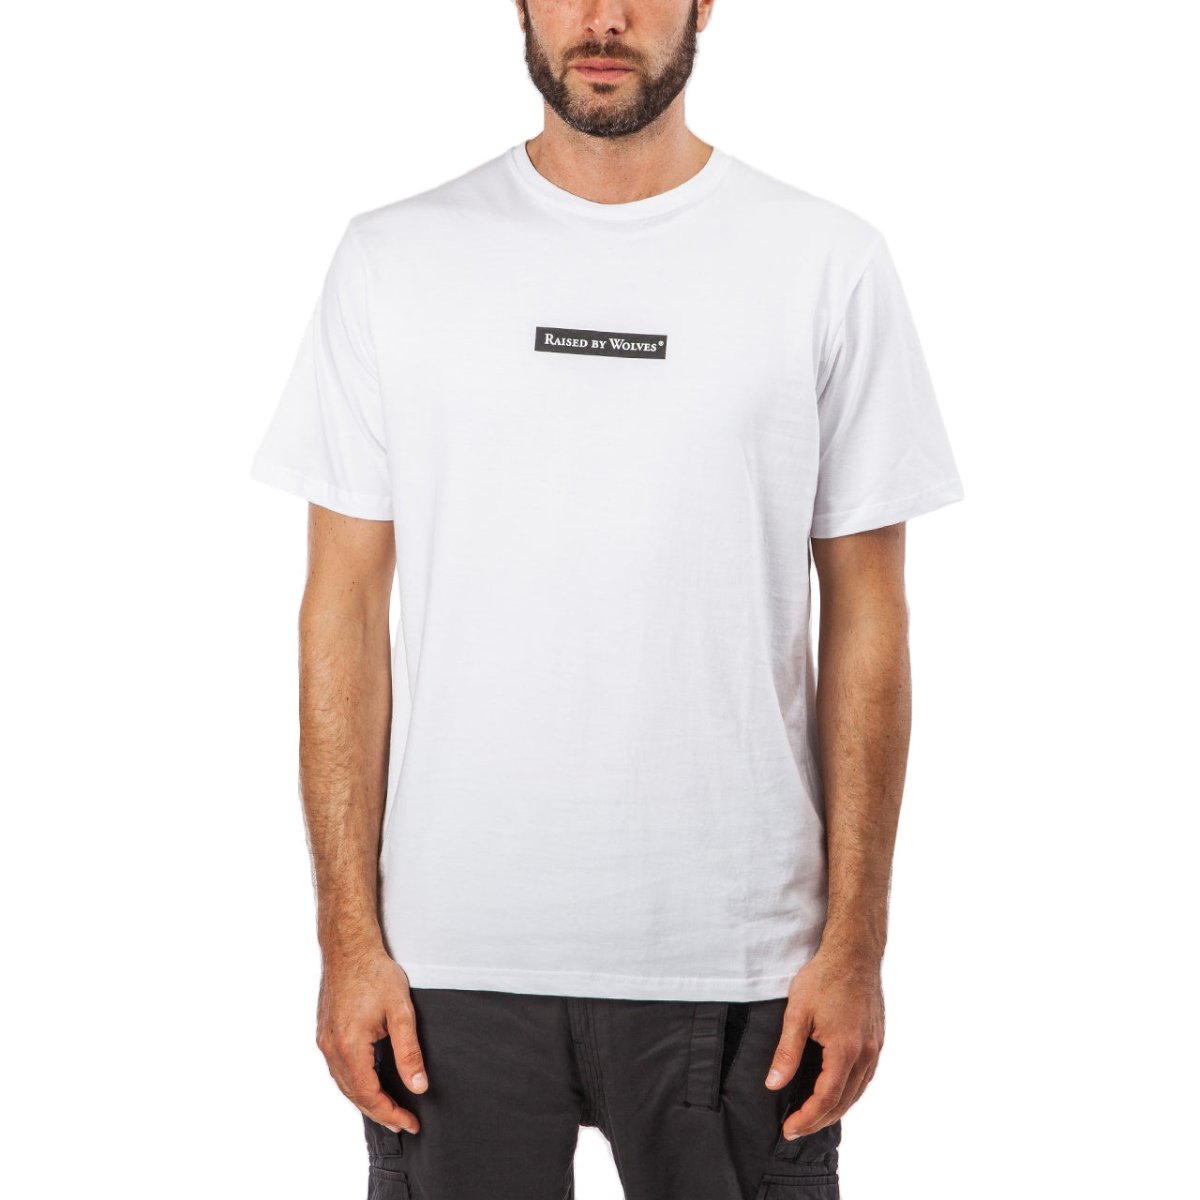 Raised by Wolves Registered Box Logo T-Shirt (Weiß)  - Allike Store